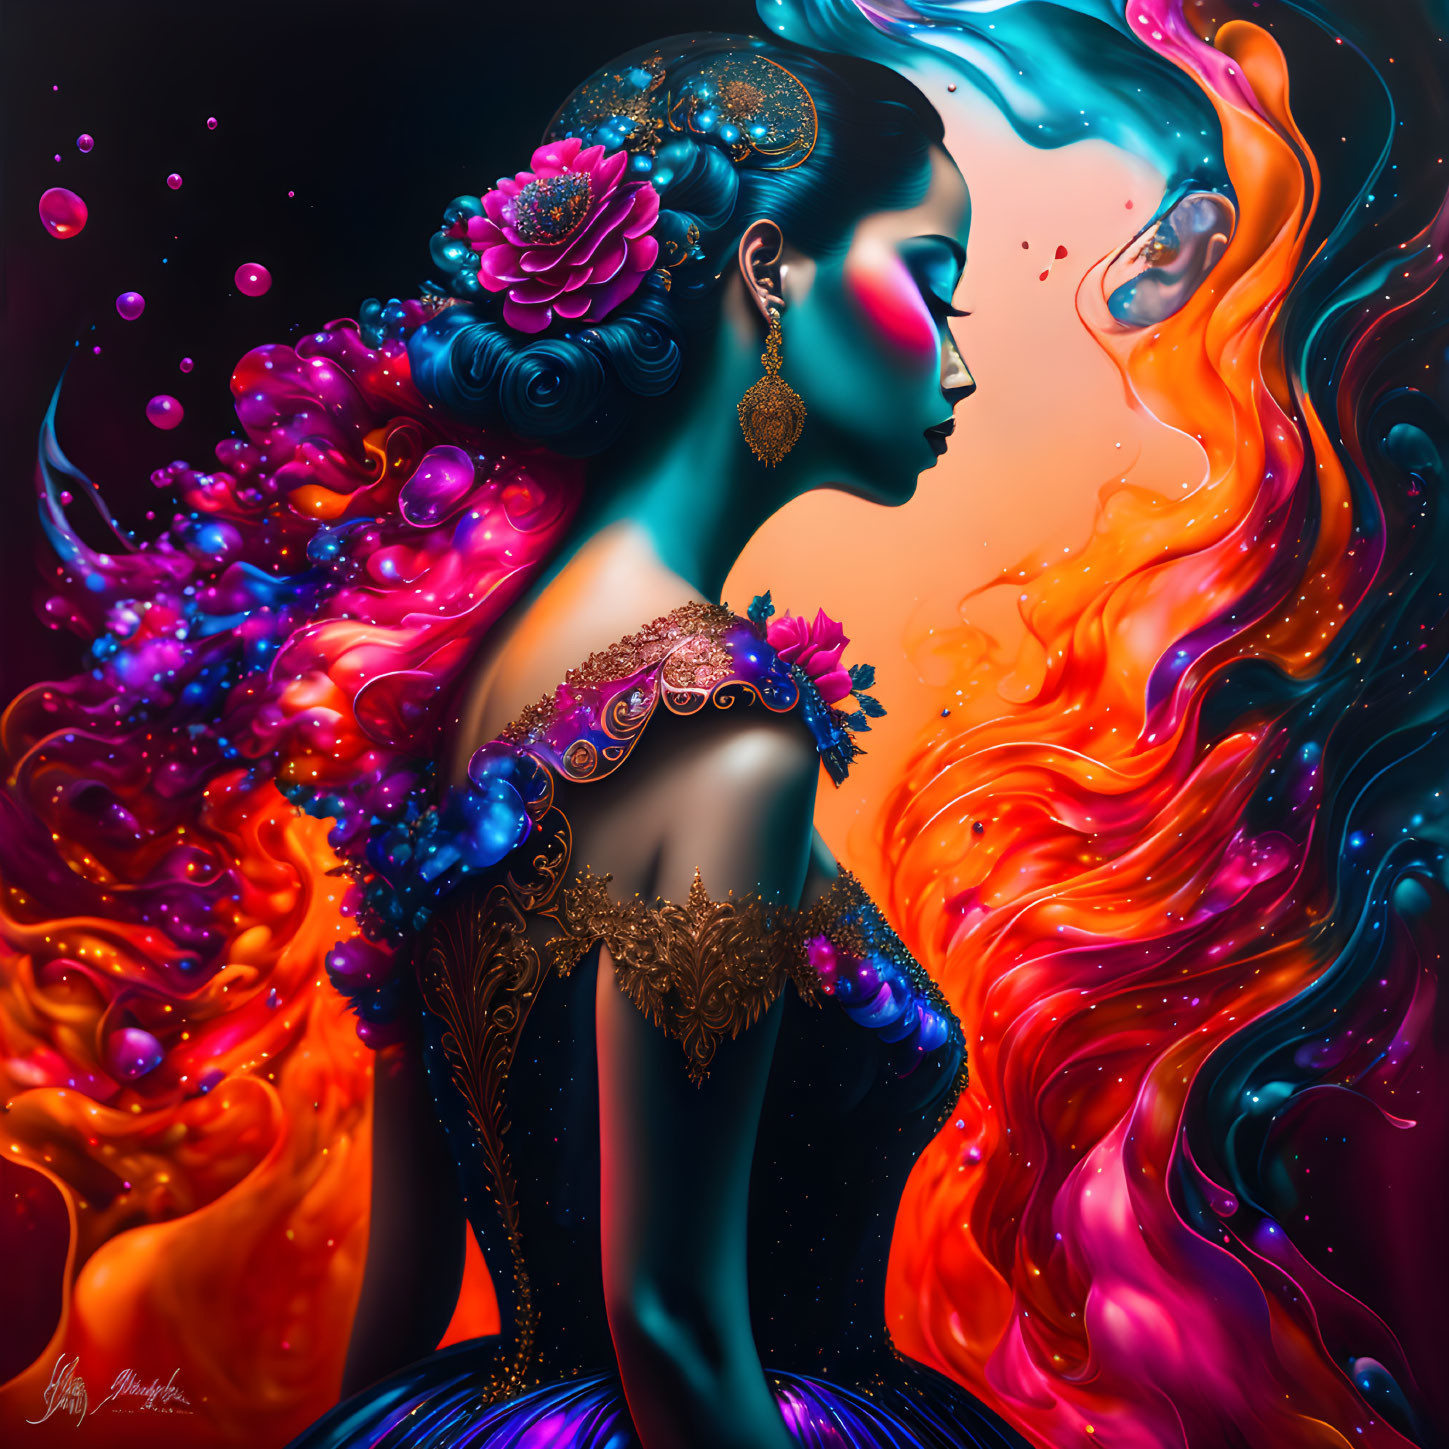 Colorful digital artwork: Woman profile with flowing fiery colors